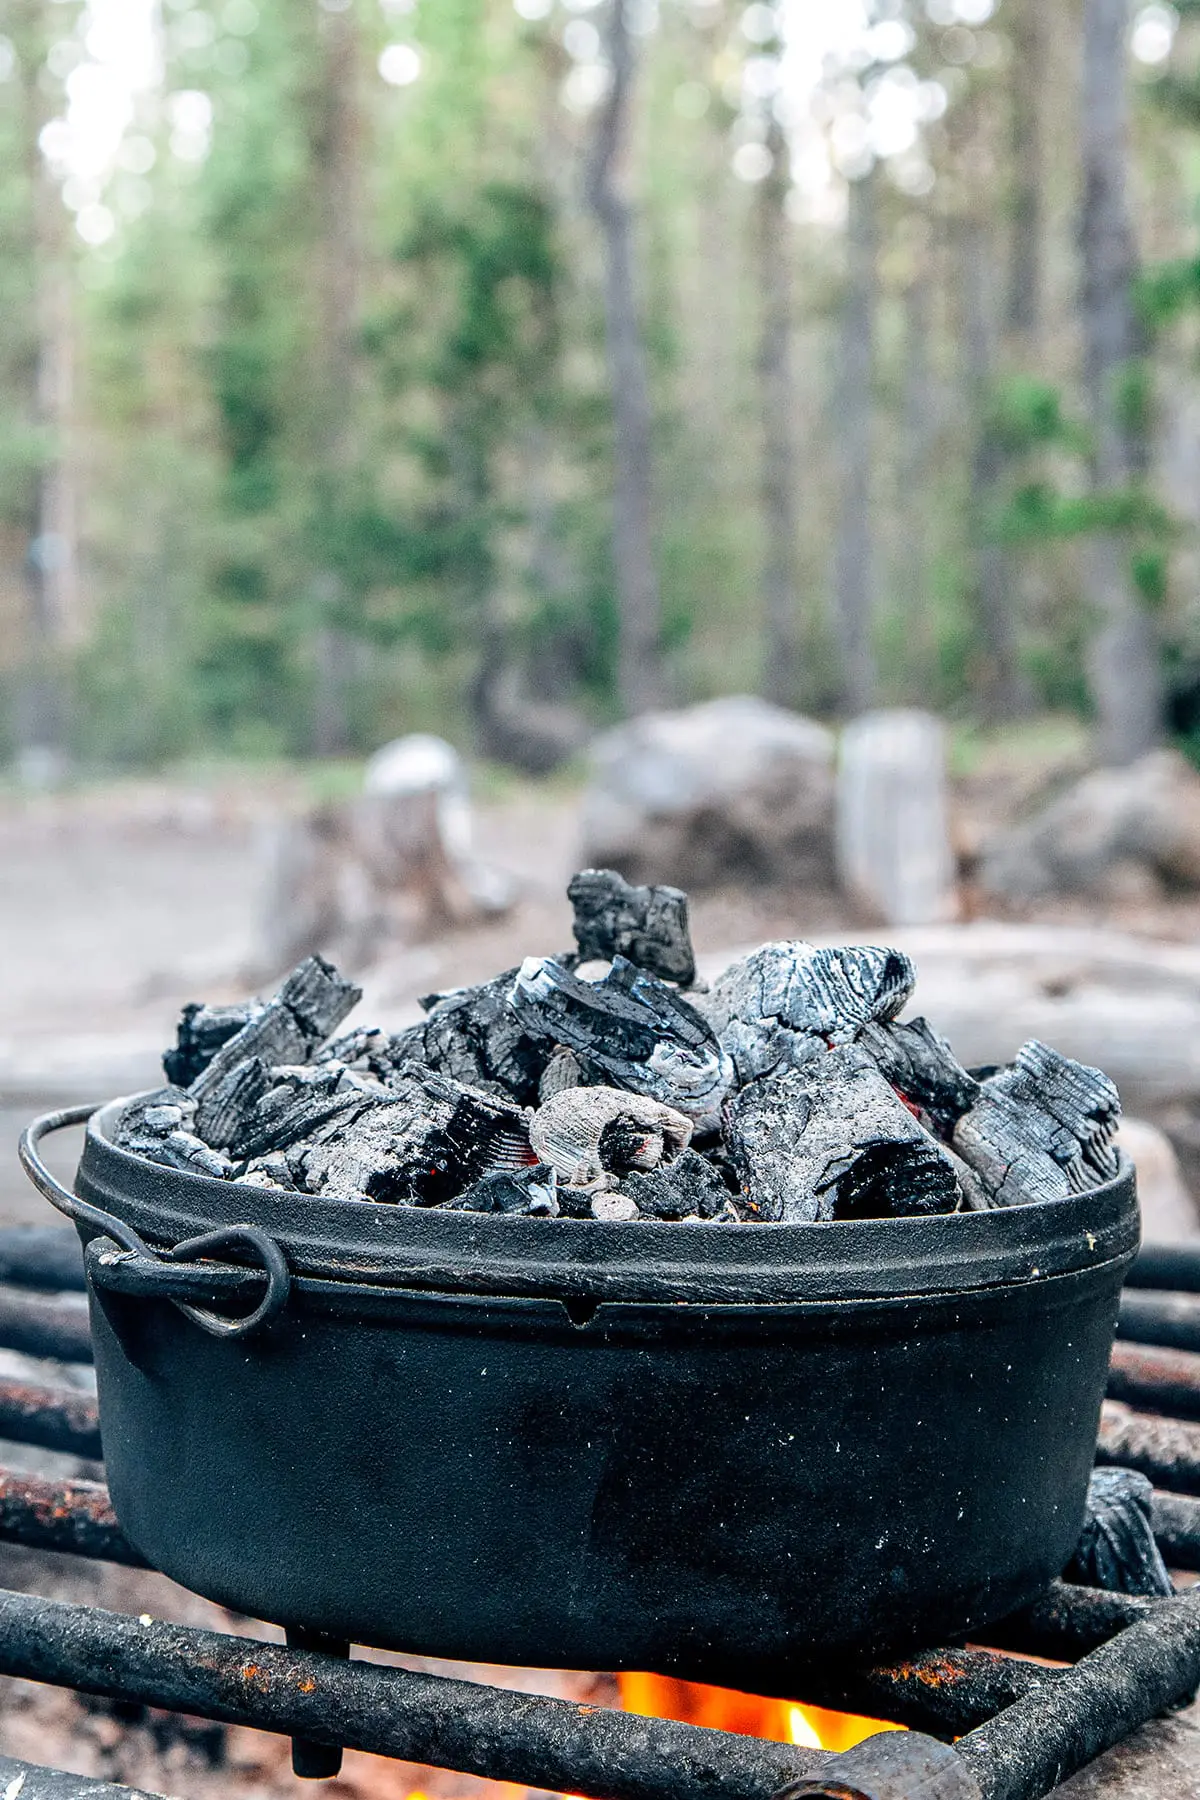 A Dutch oven over a campfire with coals on the lid and pine trees in the background